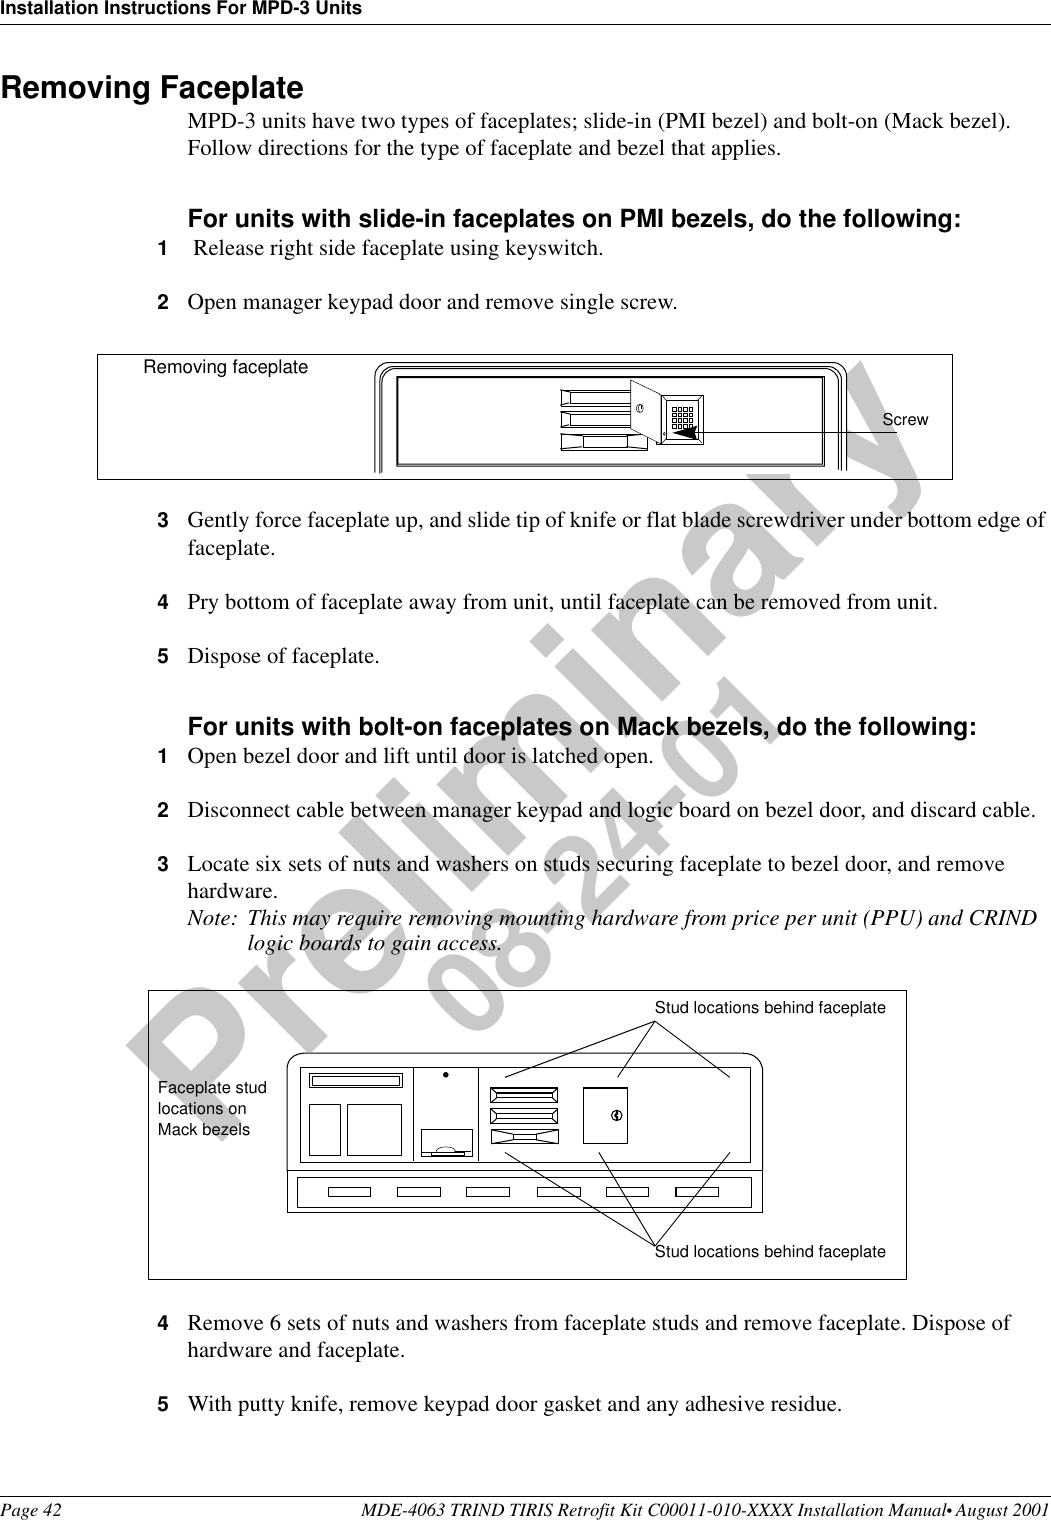 Installation Instructions For MPD-3 UnitsPage 42 MDE-4063 TRIND TIRIS Retrofit Kit C00011-010-XXXX Installation Manual• August 2001Preliminary08-24-01Removing FaceplateMPD-3 units have two types of faceplates; slide-in (PMI bezel) and bolt-on (Mack bezel). Follow directions for the type of faceplate and bezel that applies.For units with slide-in faceplates on PMI bezels, do the following:1 Release right side faceplate using keyswitch.2Open manager keypad door and remove single screw. 3Gently force faceplate up, and slide tip of knife or flat blade screwdriver under bottom edge of faceplate. 4Pry bottom of faceplate away from unit, until faceplate can be removed from unit. 5Dispose of faceplate.For units with bolt-on faceplates on Mack bezels, do the following:1Open bezel door and lift until door is latched open.2Disconnect cable between manager keypad and logic board on bezel door, and discard cable.3Locate six sets of nuts and washers on studs securing faceplate to bezel door, and remove hardware.Note: This may require removing mounting hardware from price per unit (PPU) and CRIND logic boards to gain access. 4Remove 6 sets of nuts and washers from faceplate studs and remove faceplate. Dispose of hardware and faceplate.5With putty knife, remove keypad door gasket and any adhesive residue.ScrewRemoving faceplateStud locations behind faceplateStud locations behind faceplateFaceplate stud locations on Mack bezels 